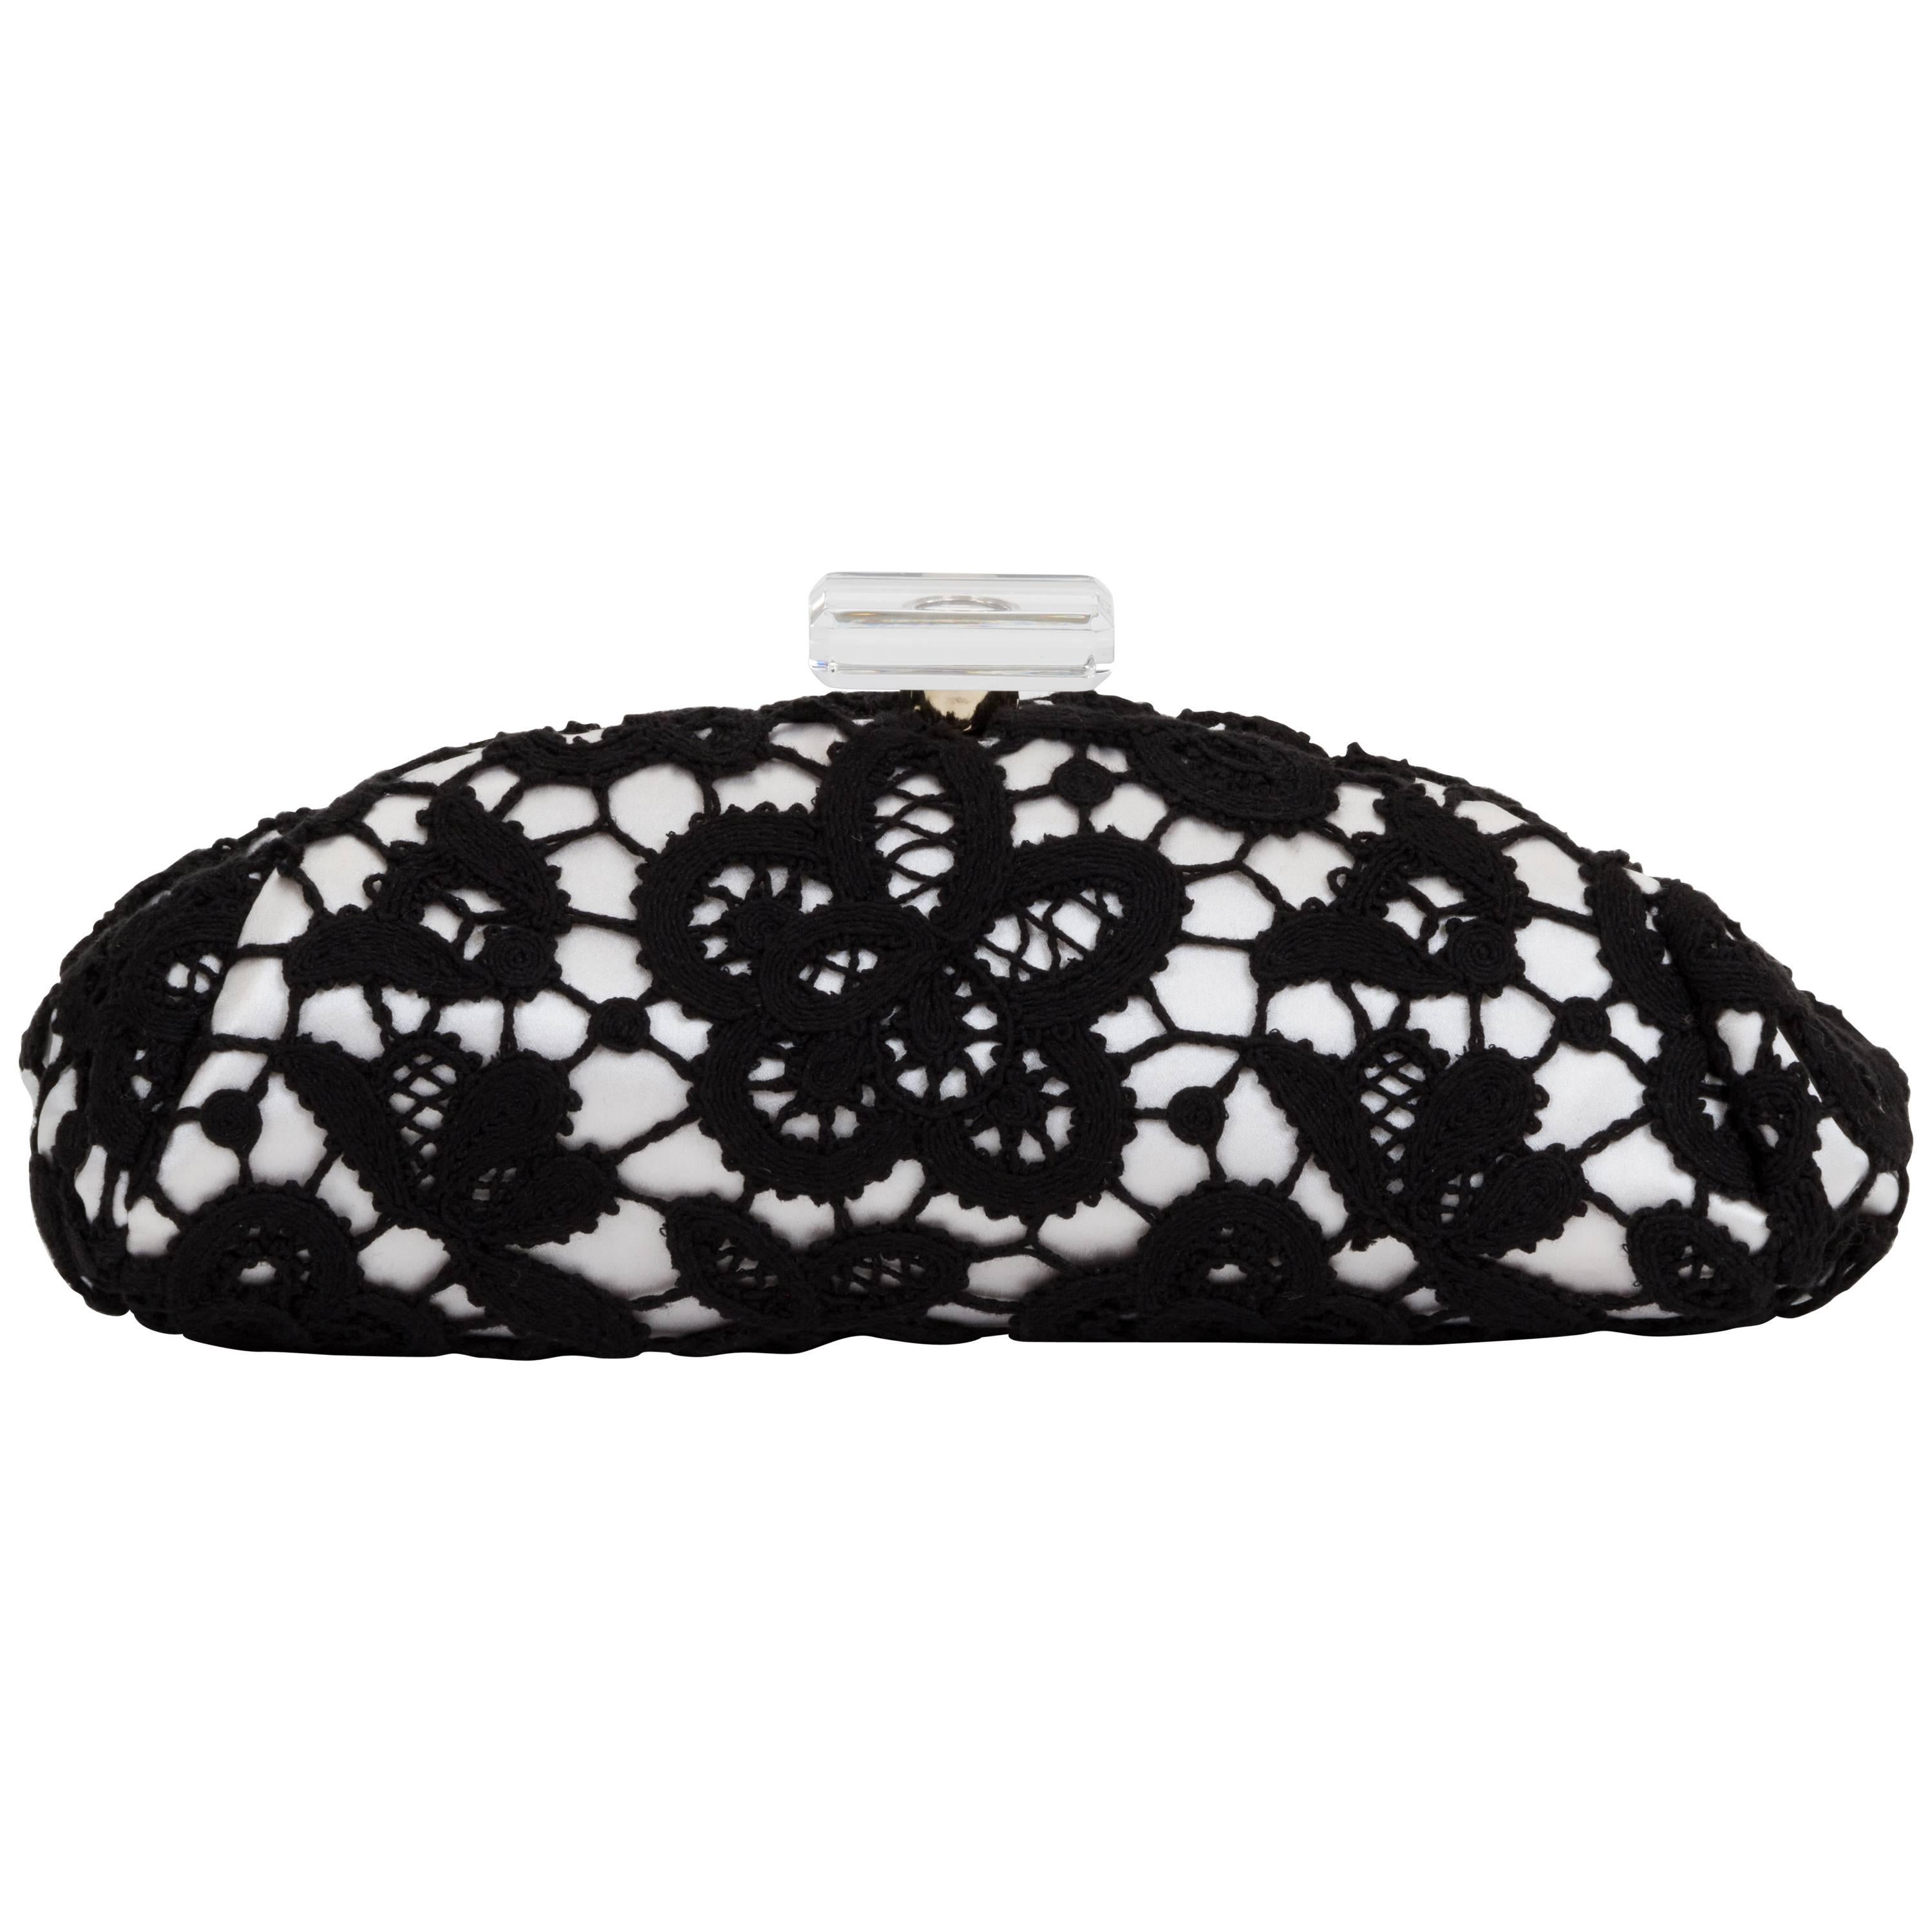 Chanel Limited Edition Large Lace & Lucite Clutch